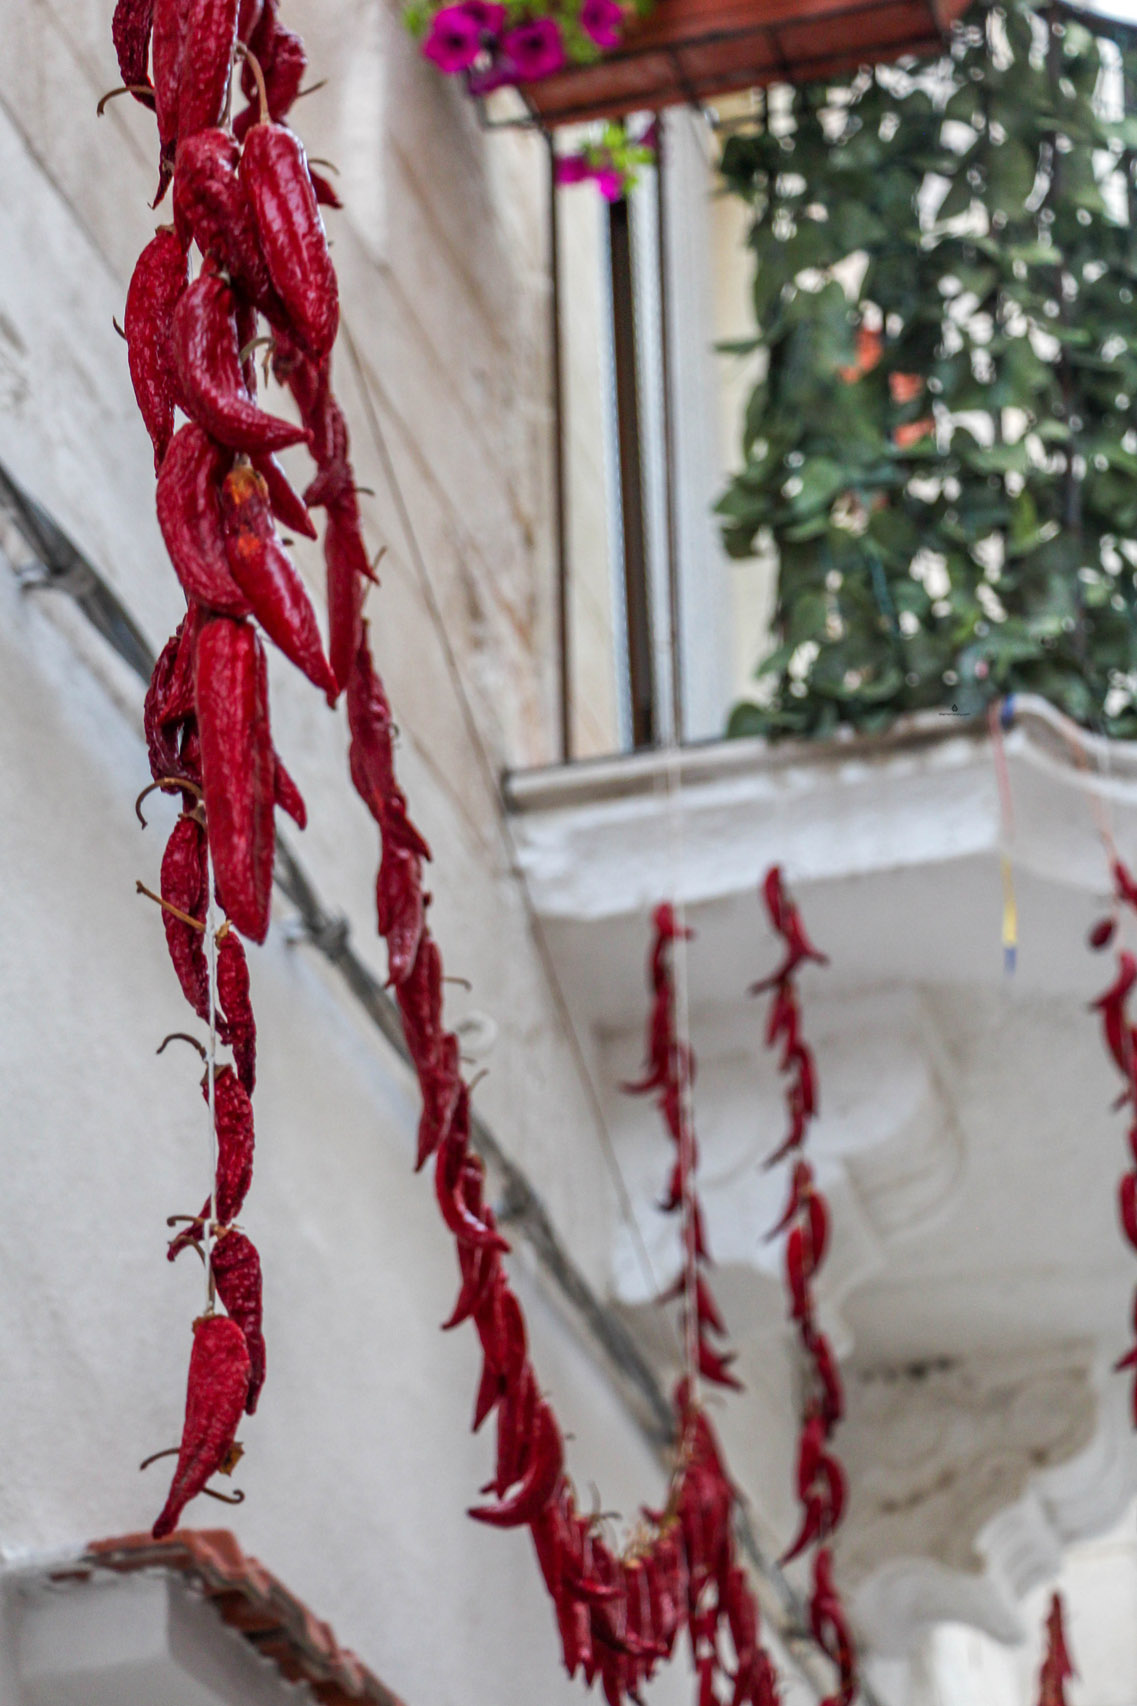 Peppers left to dry in Vieste, Italy